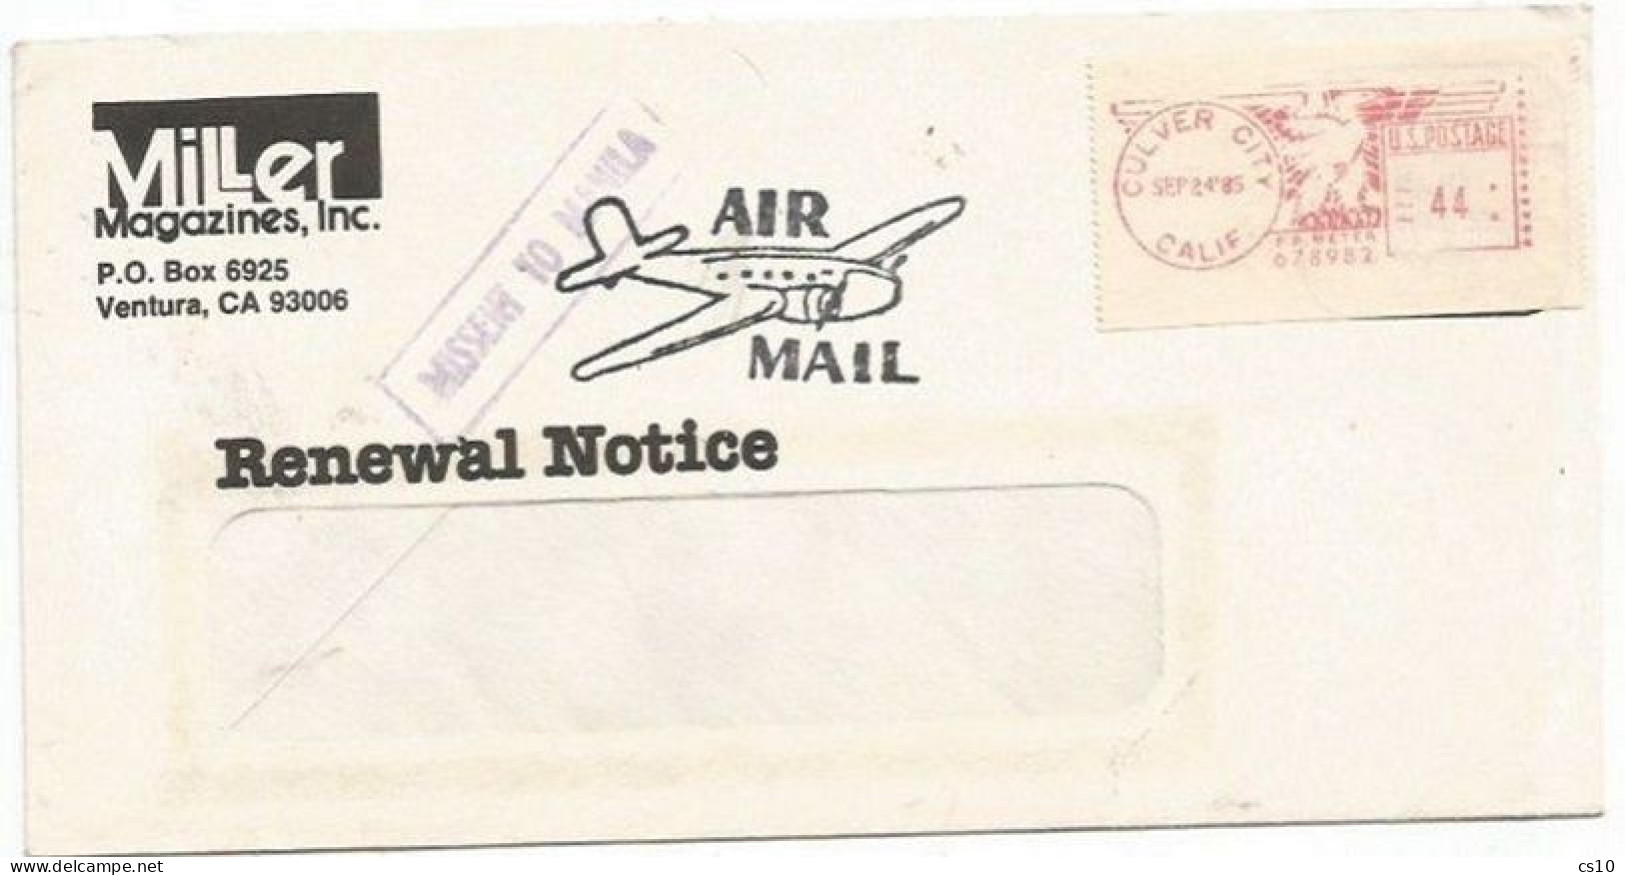 USA 1985 AirmailCV Culver City CA 24sep85 X Italy Milano "MISSENT TO MANILA" Postage Label C.44 - 3c. 1961-... Covers